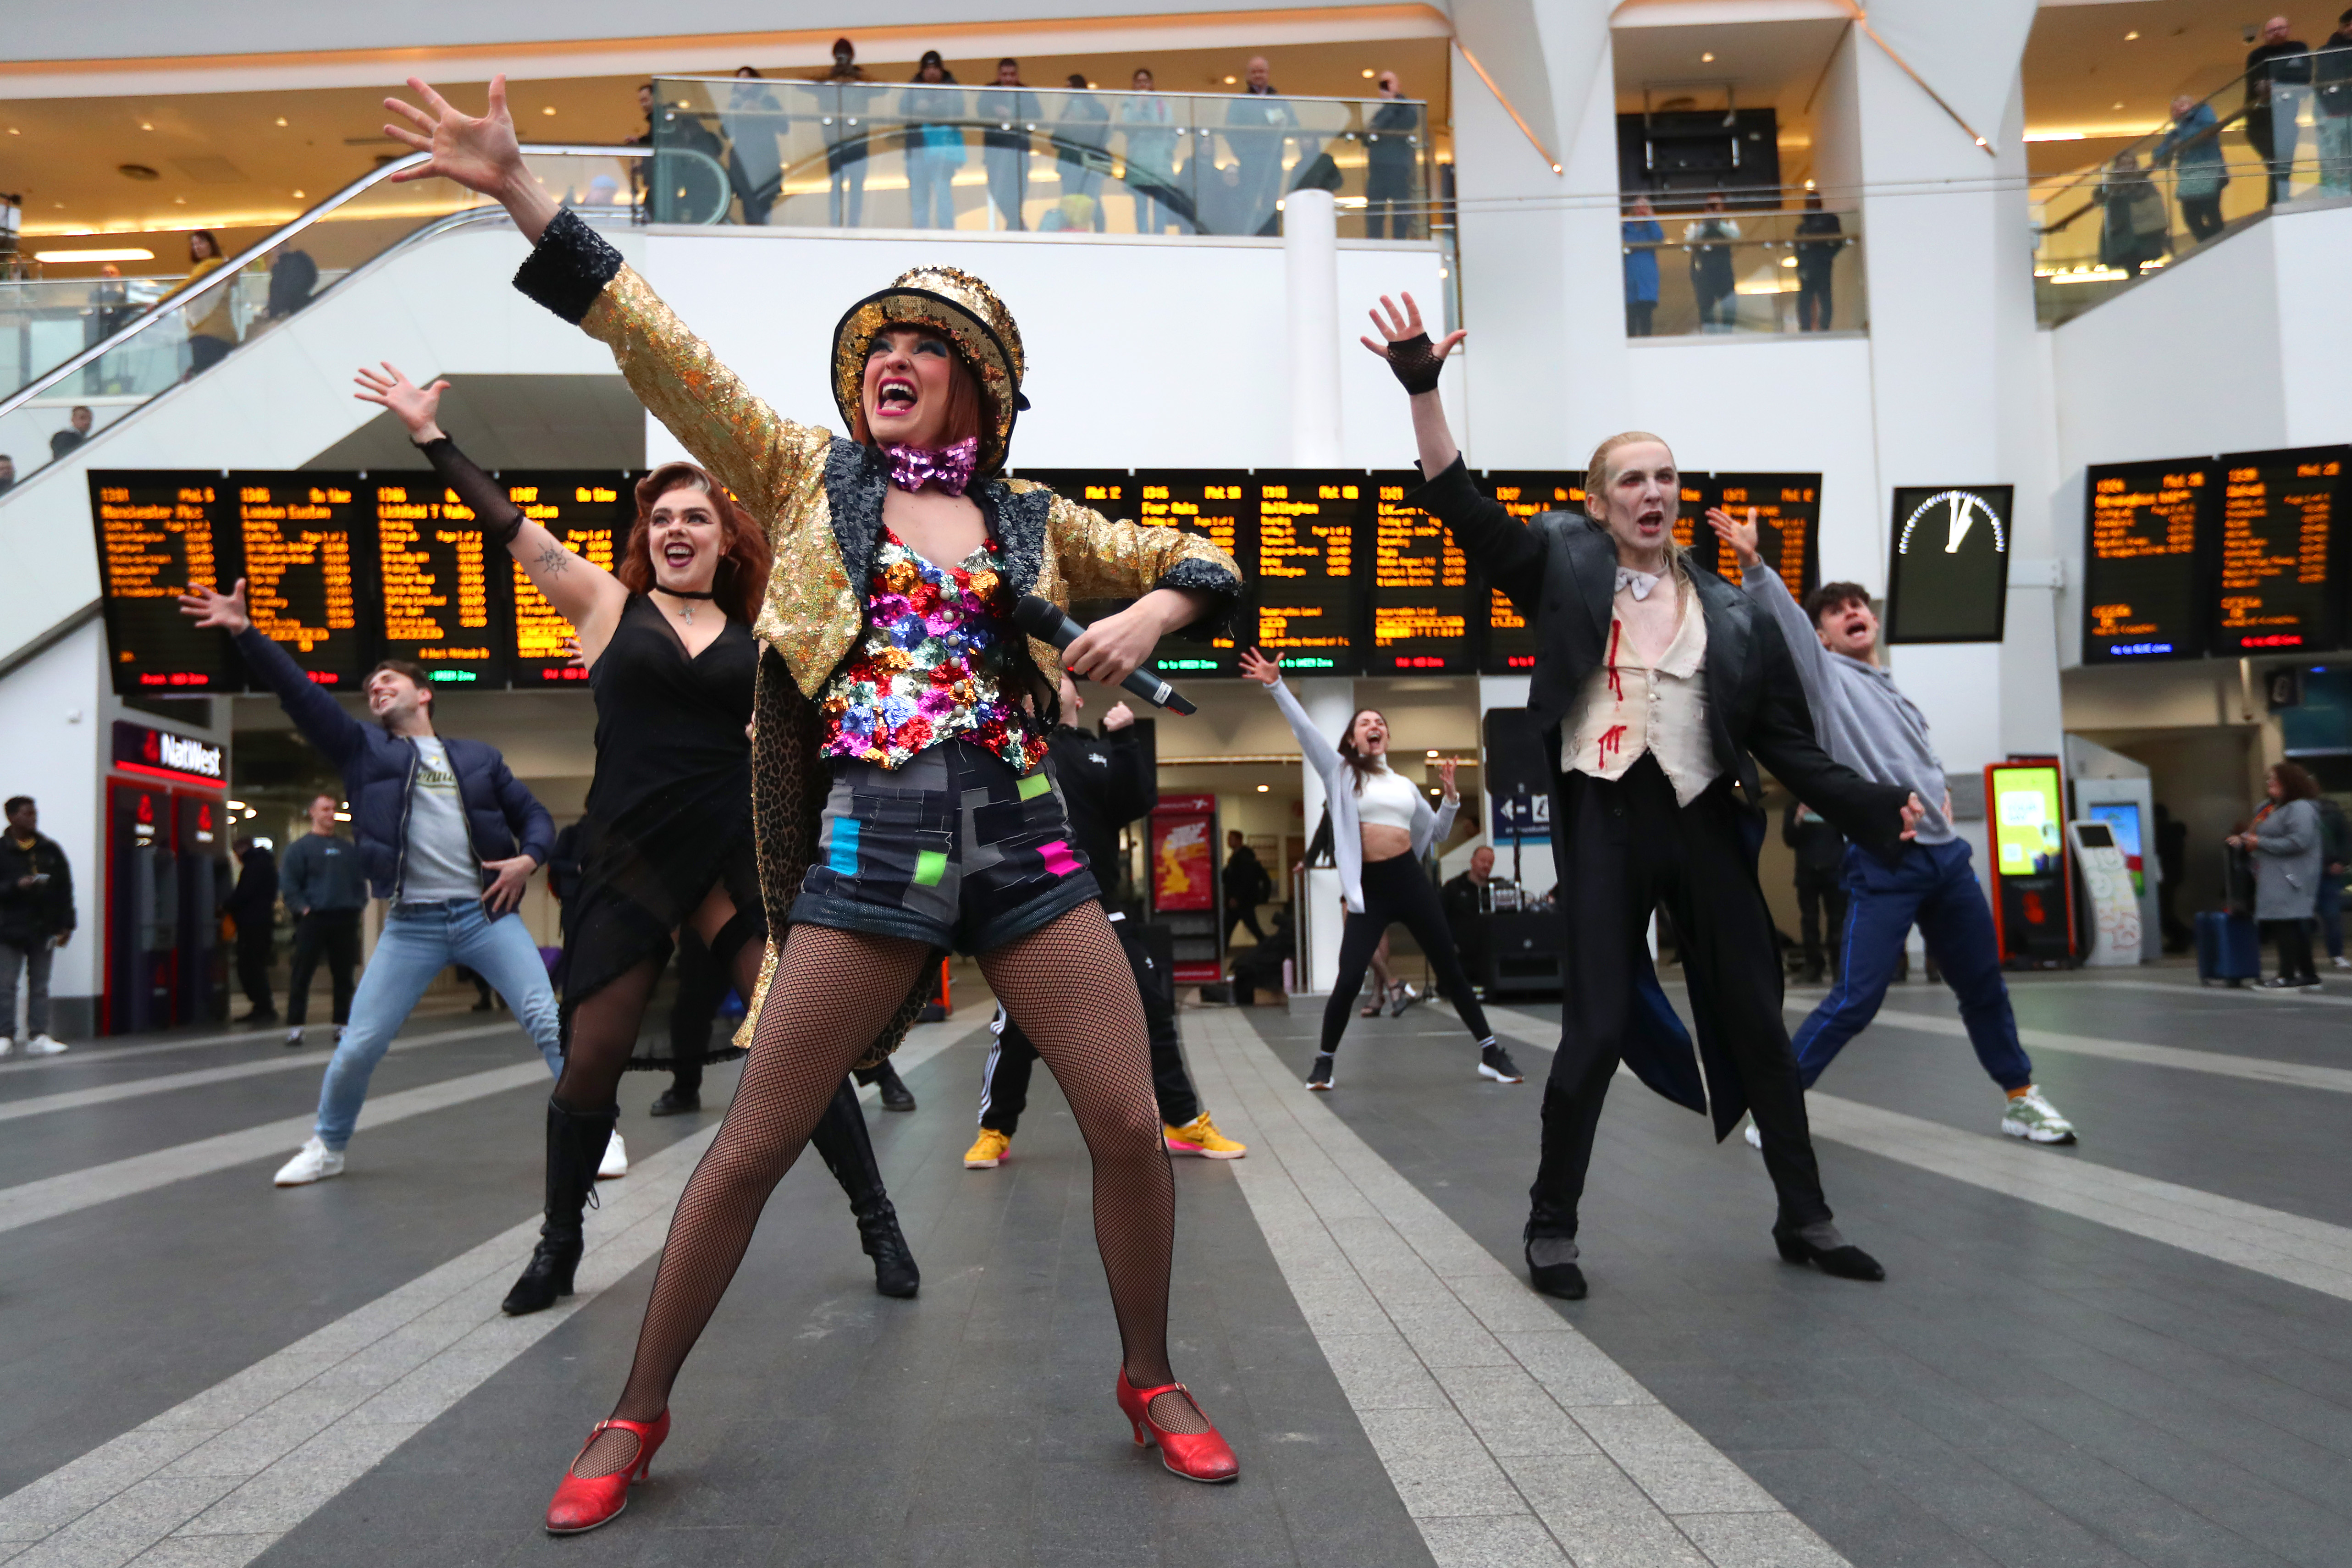 The Rocky Horror Show perform a surprise flash mob at Birmingham New Street